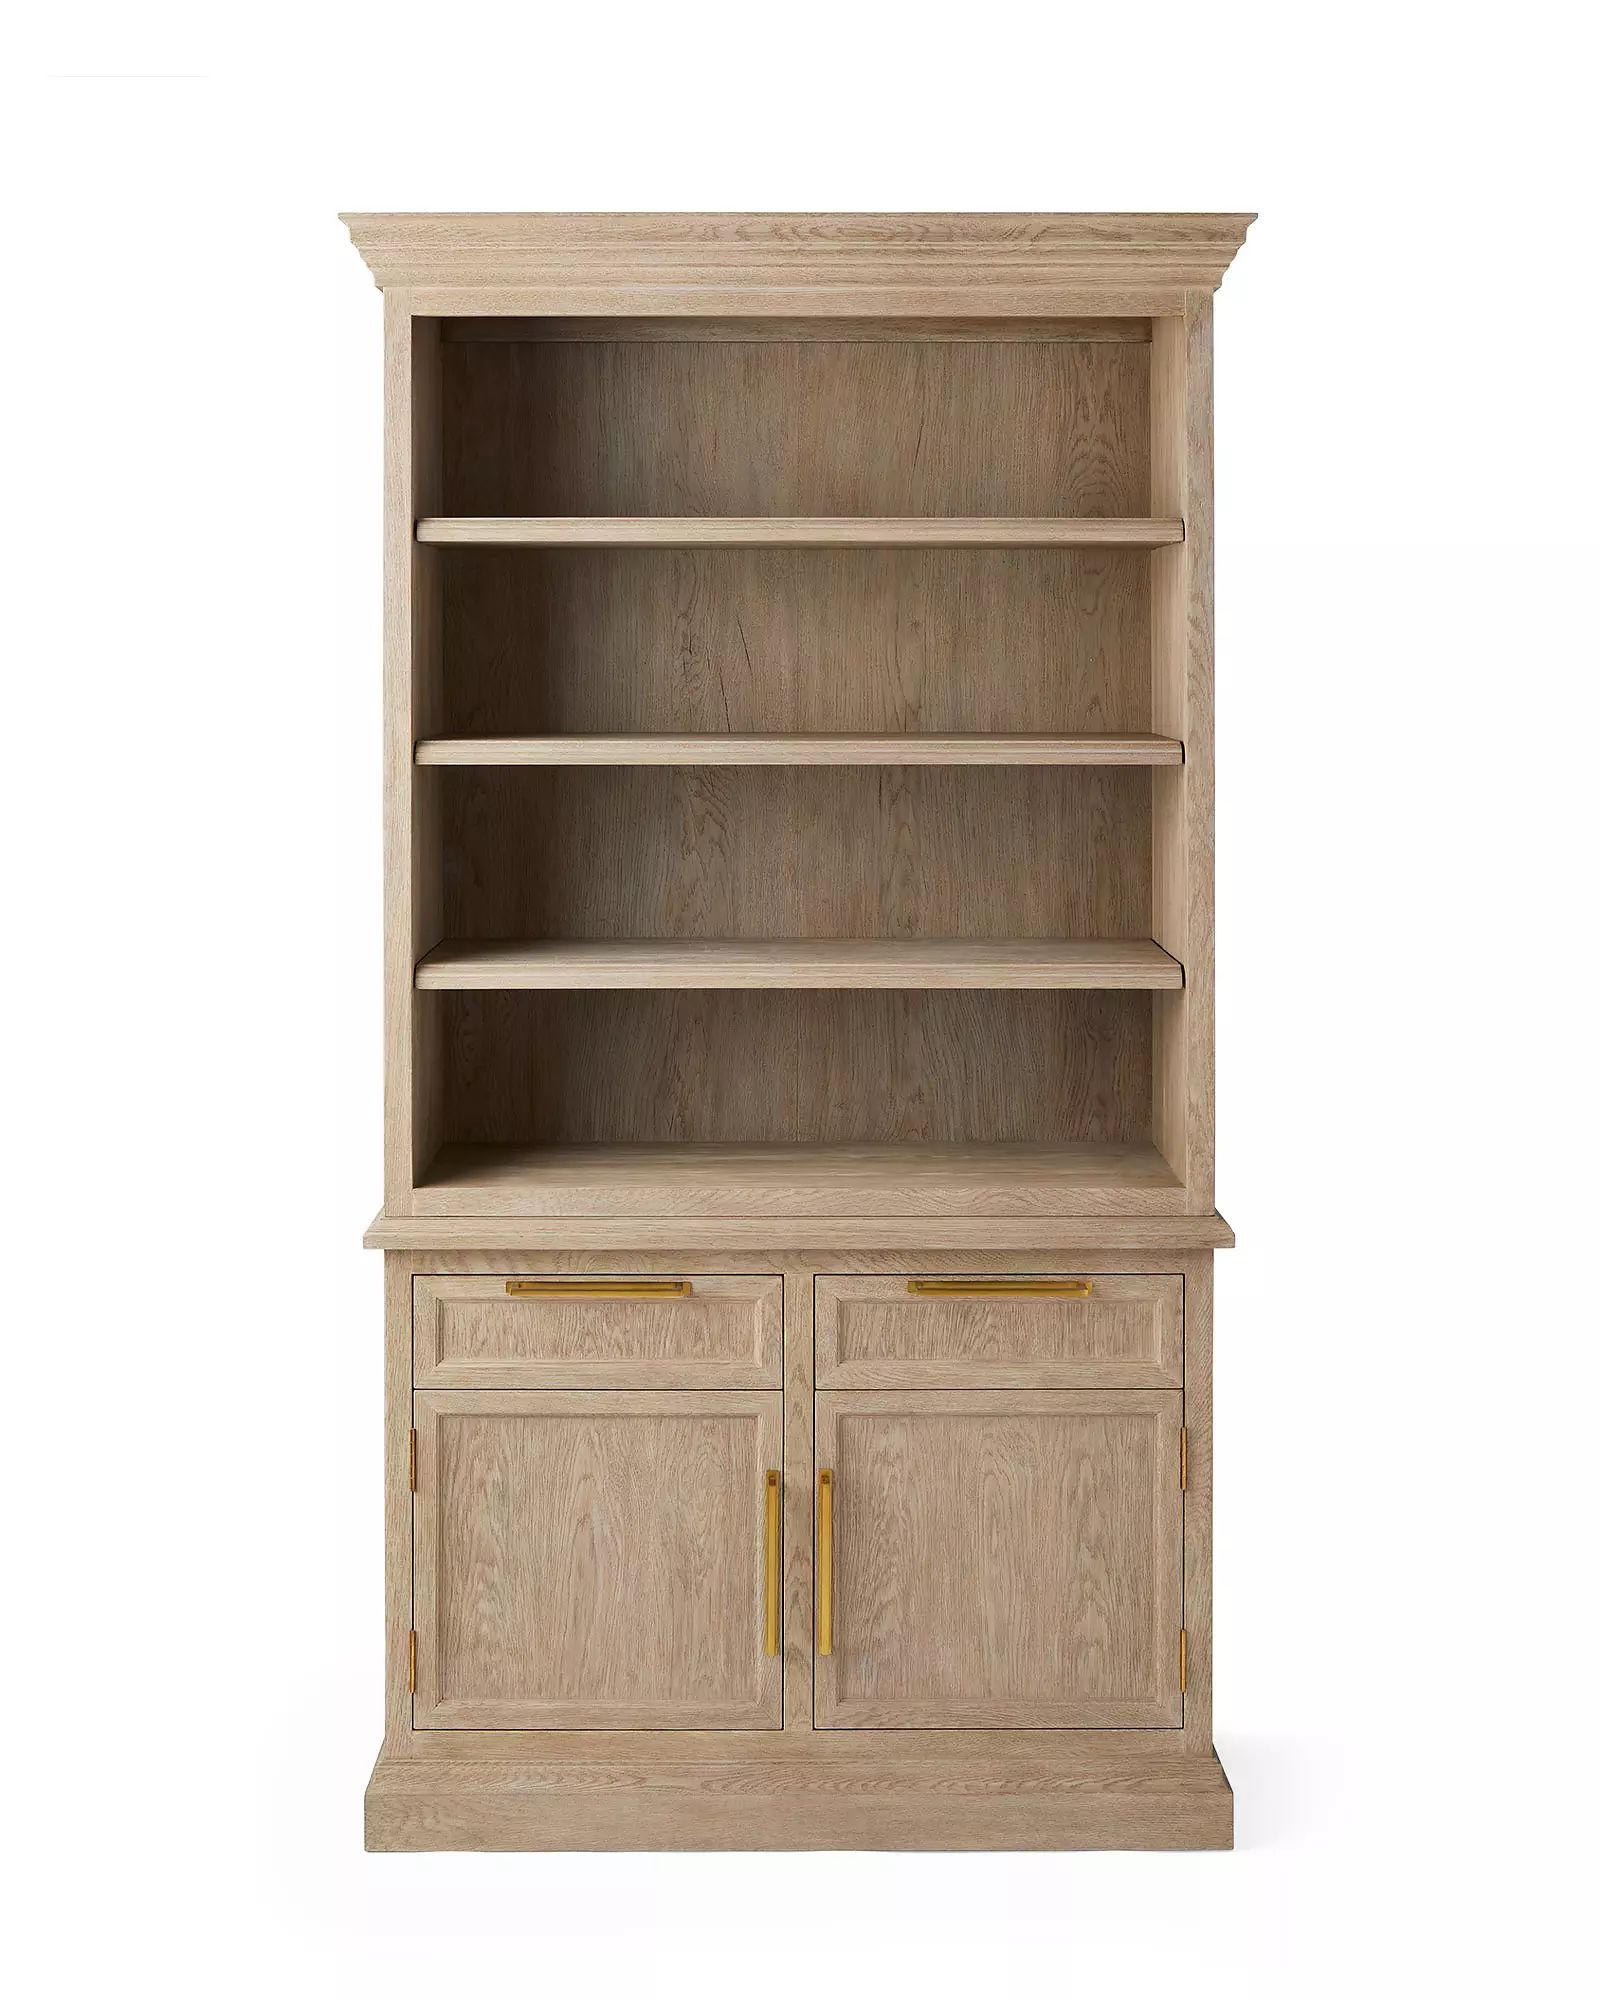 Lake House Hutch & Sideboard | Serena and Lily